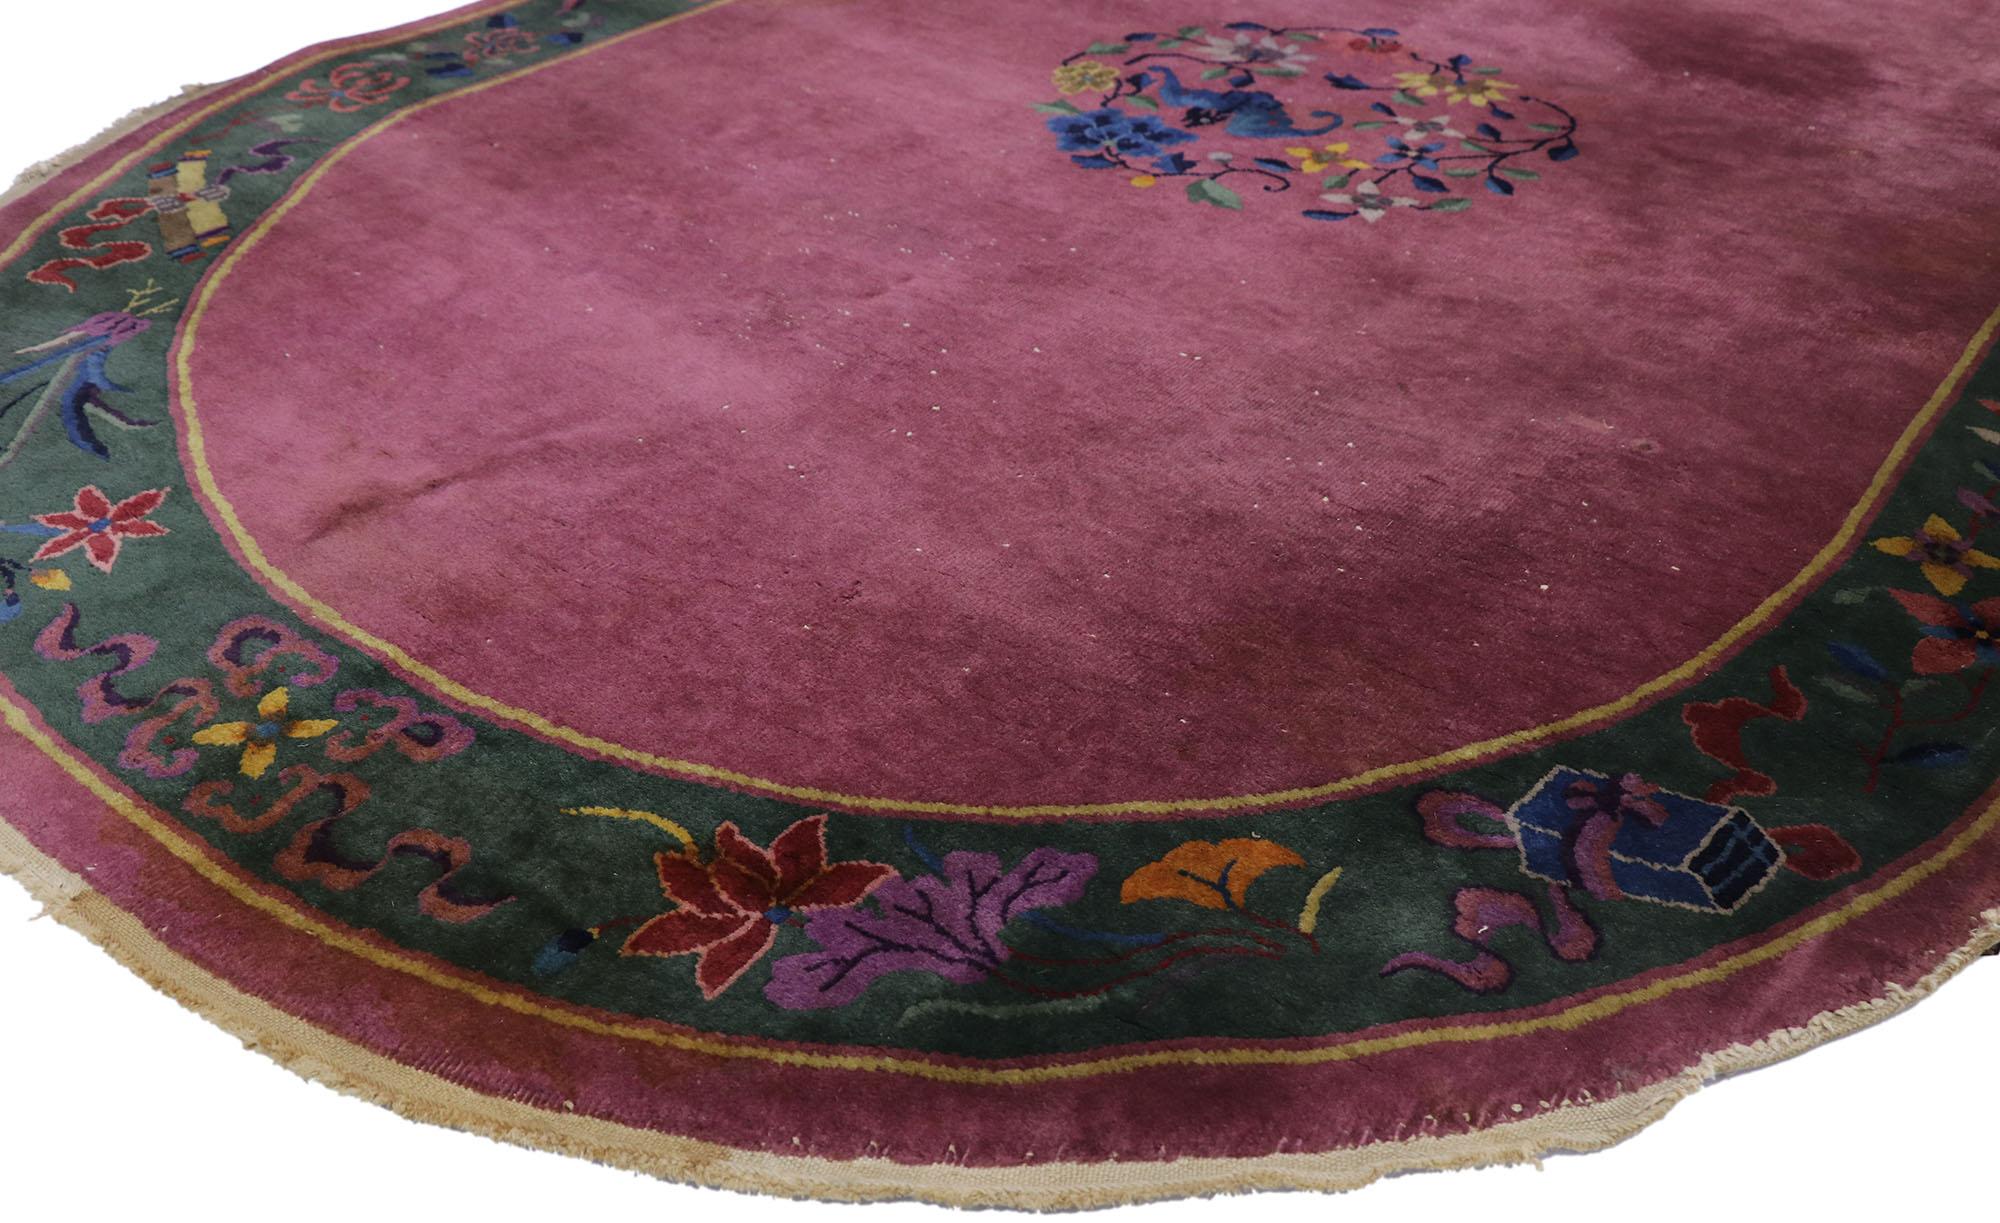 77618, antique Chinese Art Deco oval rug inspired by Walter Nichols. Channeling the famed Walter Nichols style of the 1920s and 1930s, this hand knotted wool antique Chinese Art Deco rug features a burgundy wine field with an open floral medallion